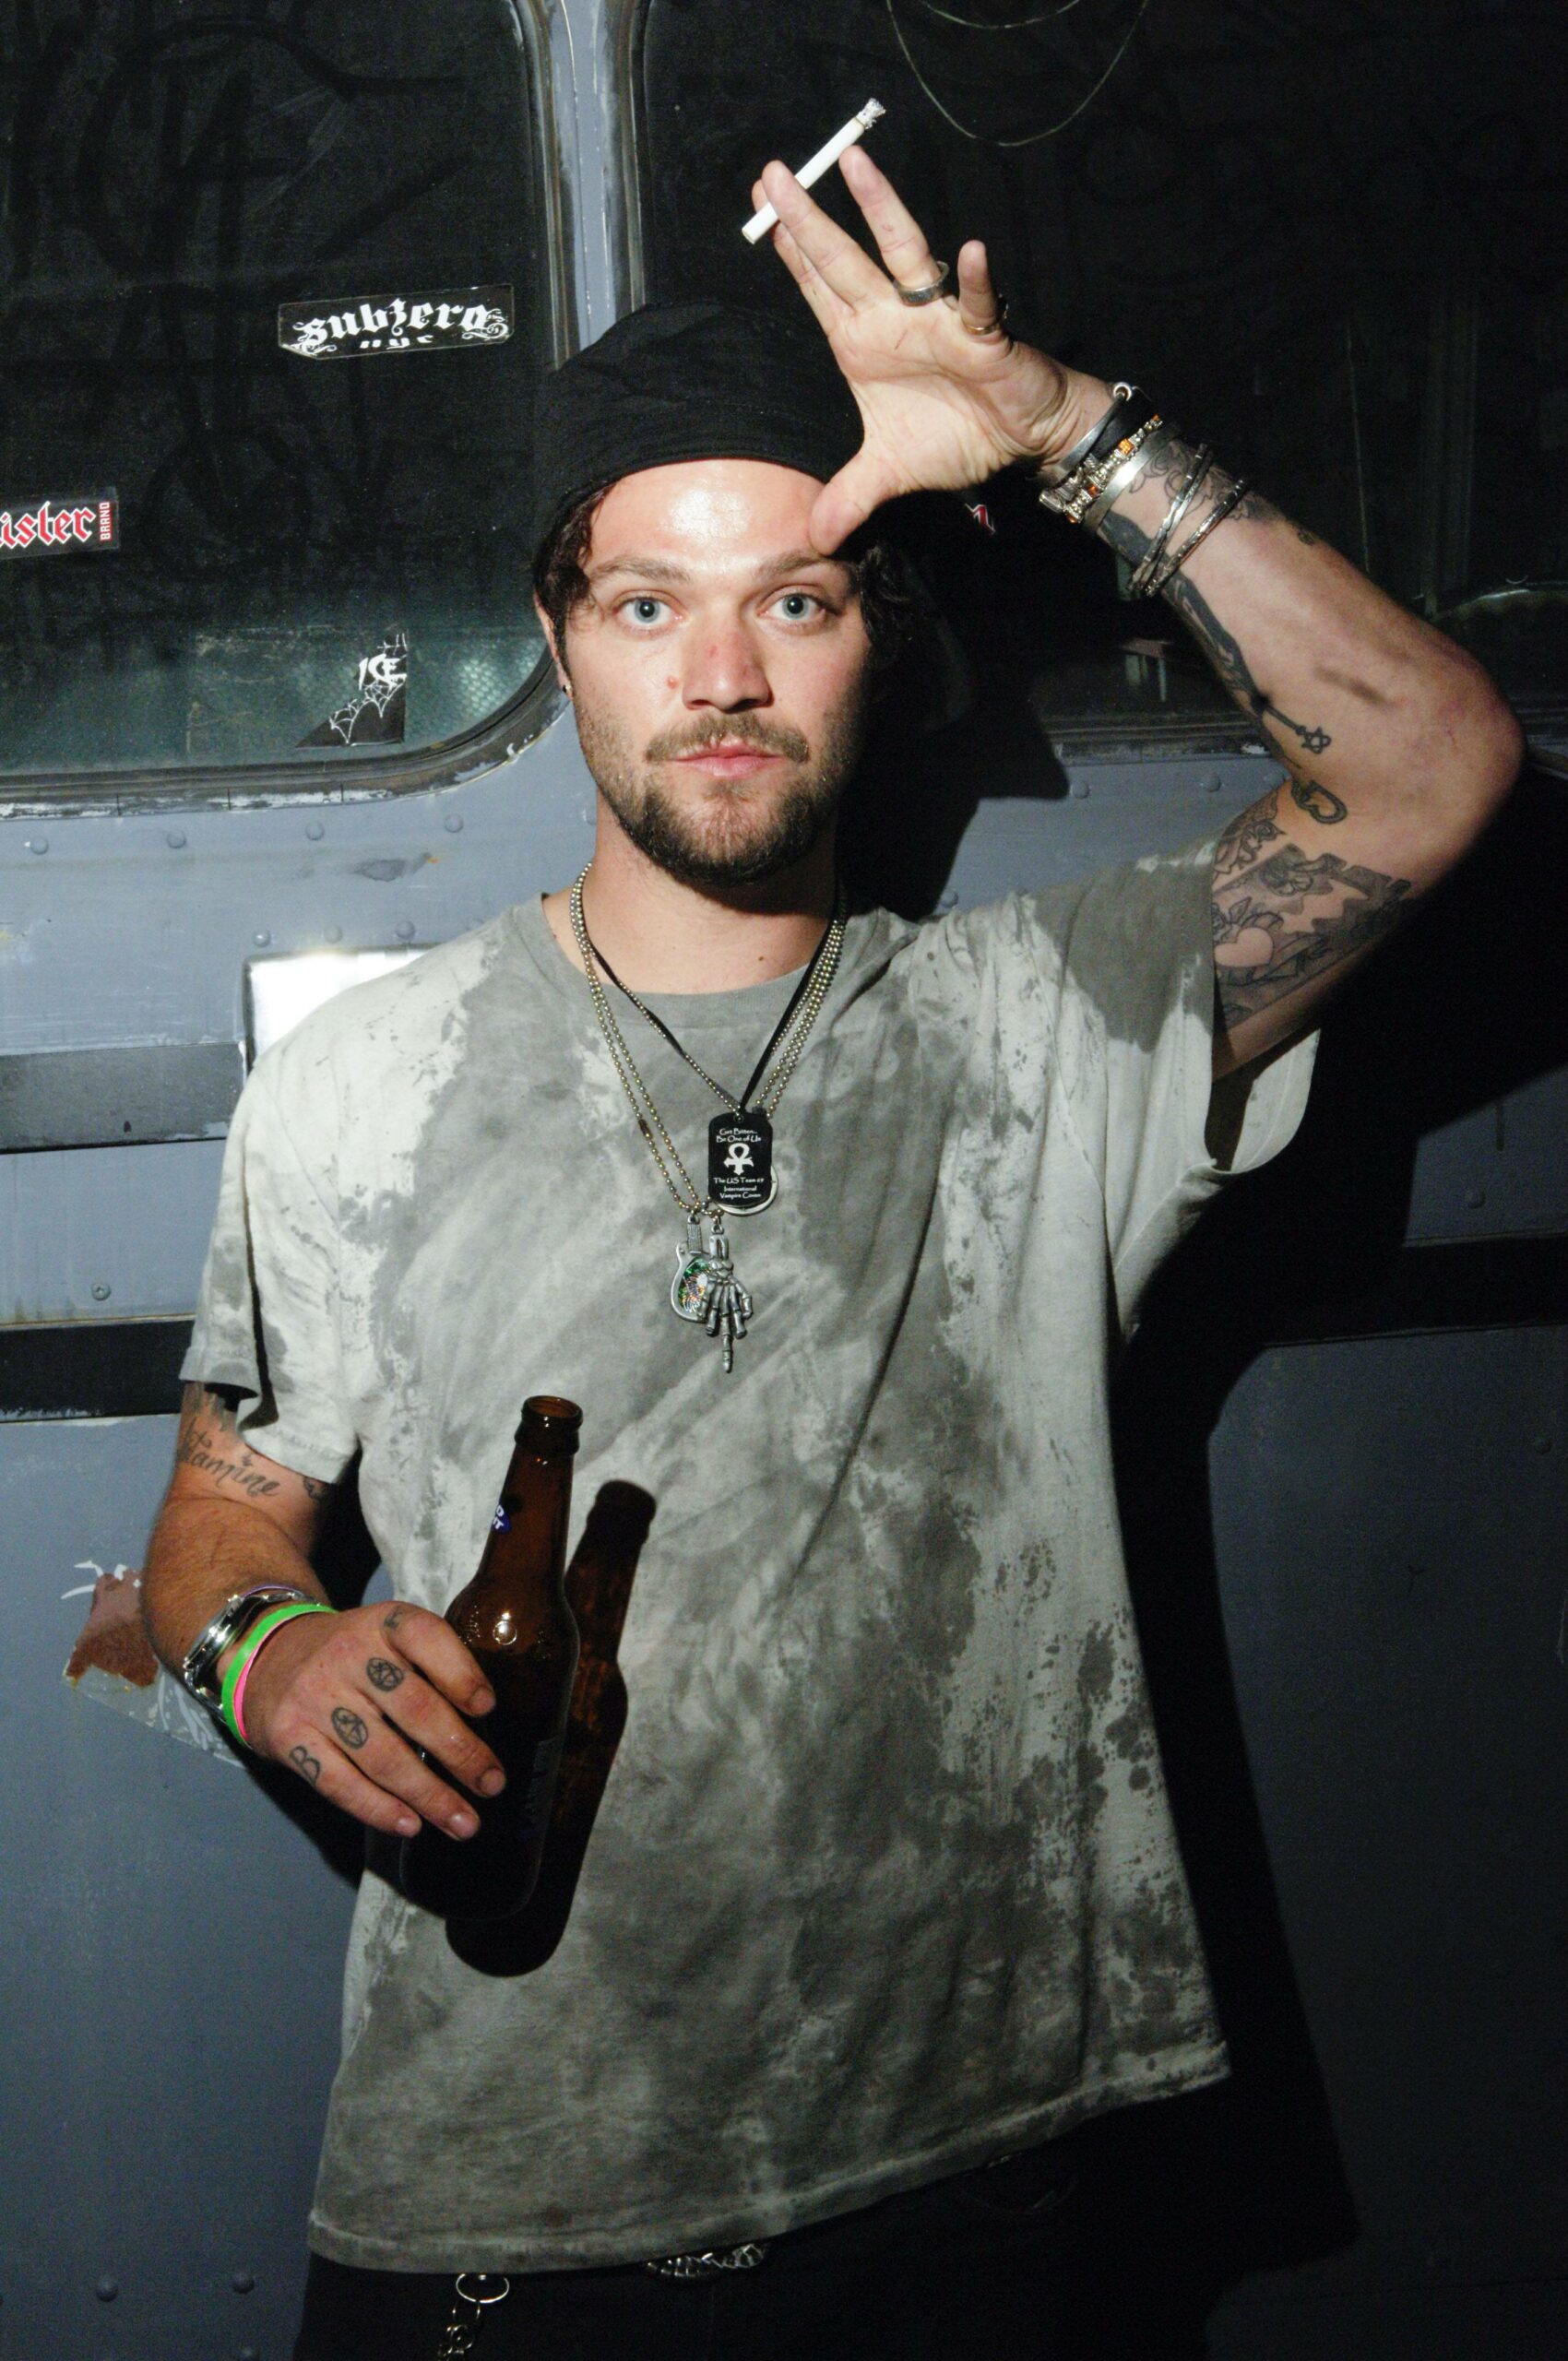 Bam Margera backstage portrait at the Key Club in Hollywood, CA USA - 2007